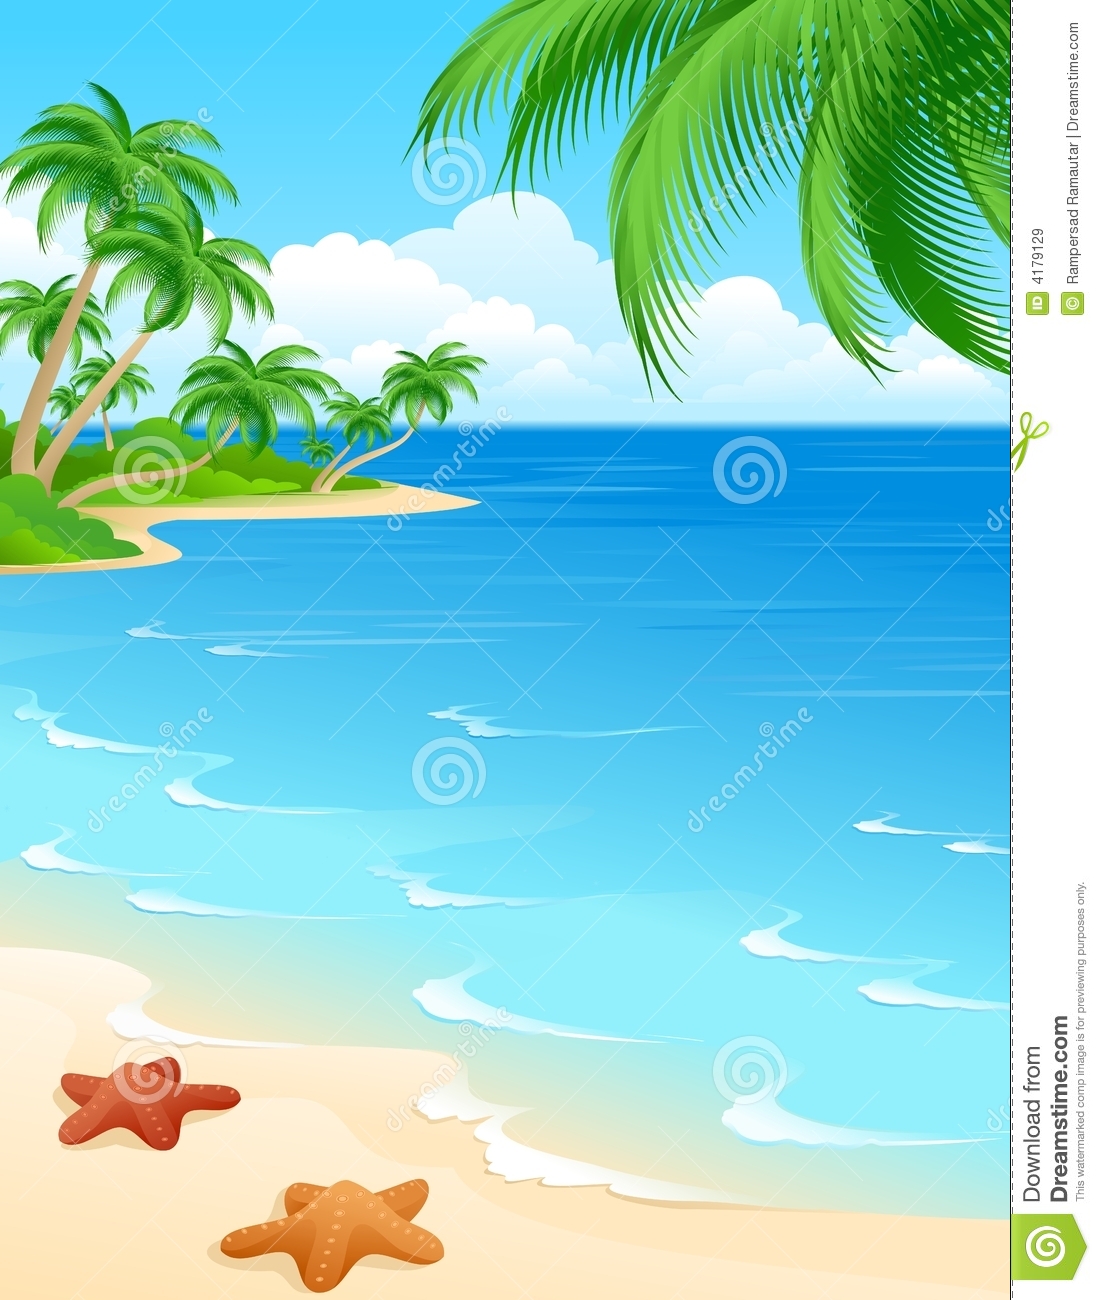 Beach Scene Royalty Free Stock Images   Image  4179129